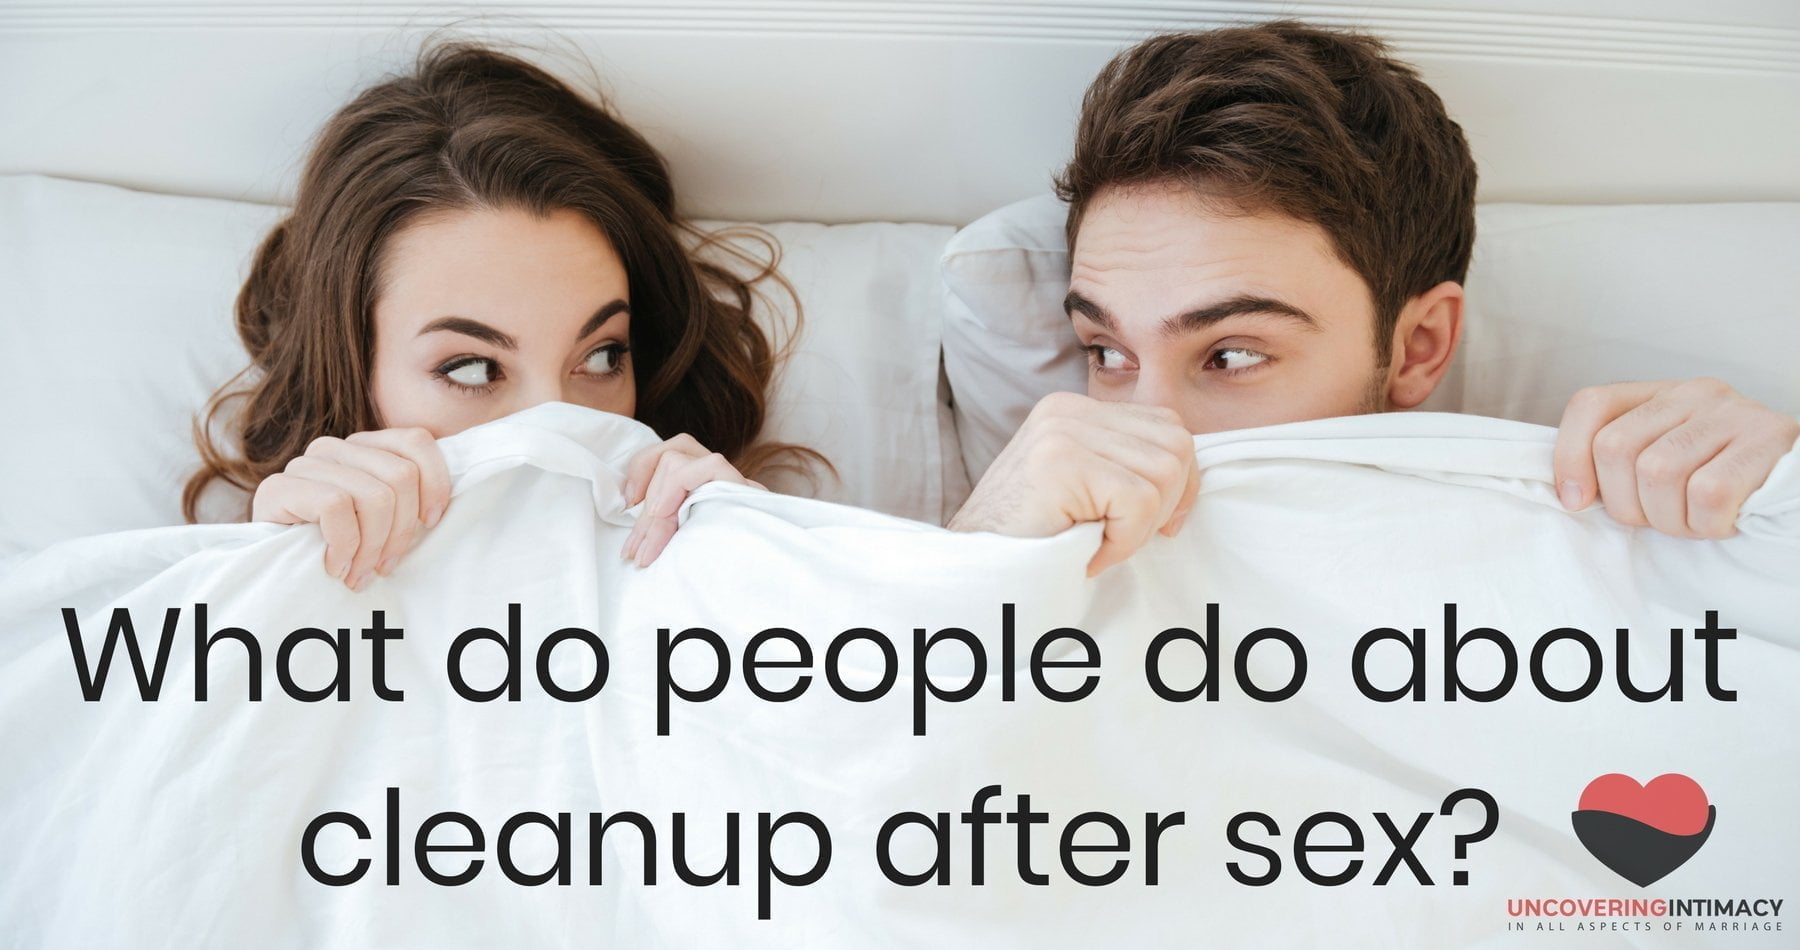 What do people do about cleanup after sex?